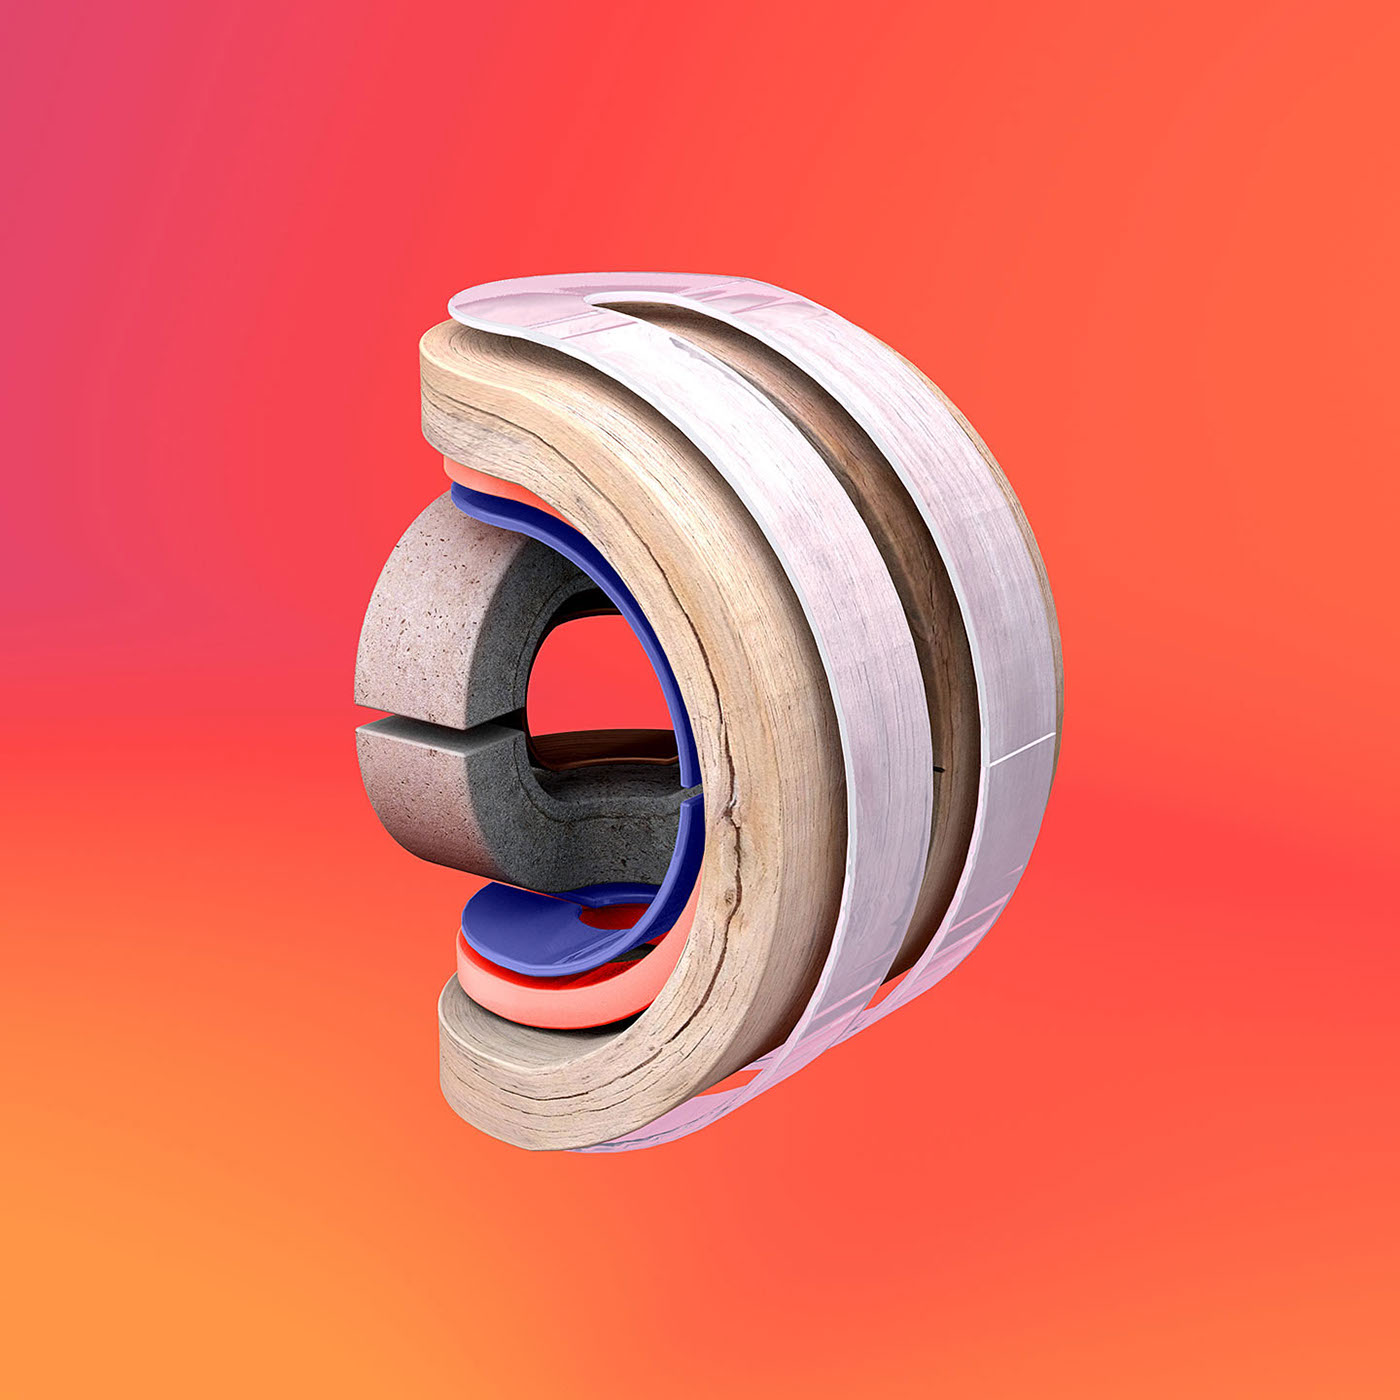 36daysoftype 3D alphabets numbers ufho graphic design singapore c4d 36 days type 3DType letters typographic CGI